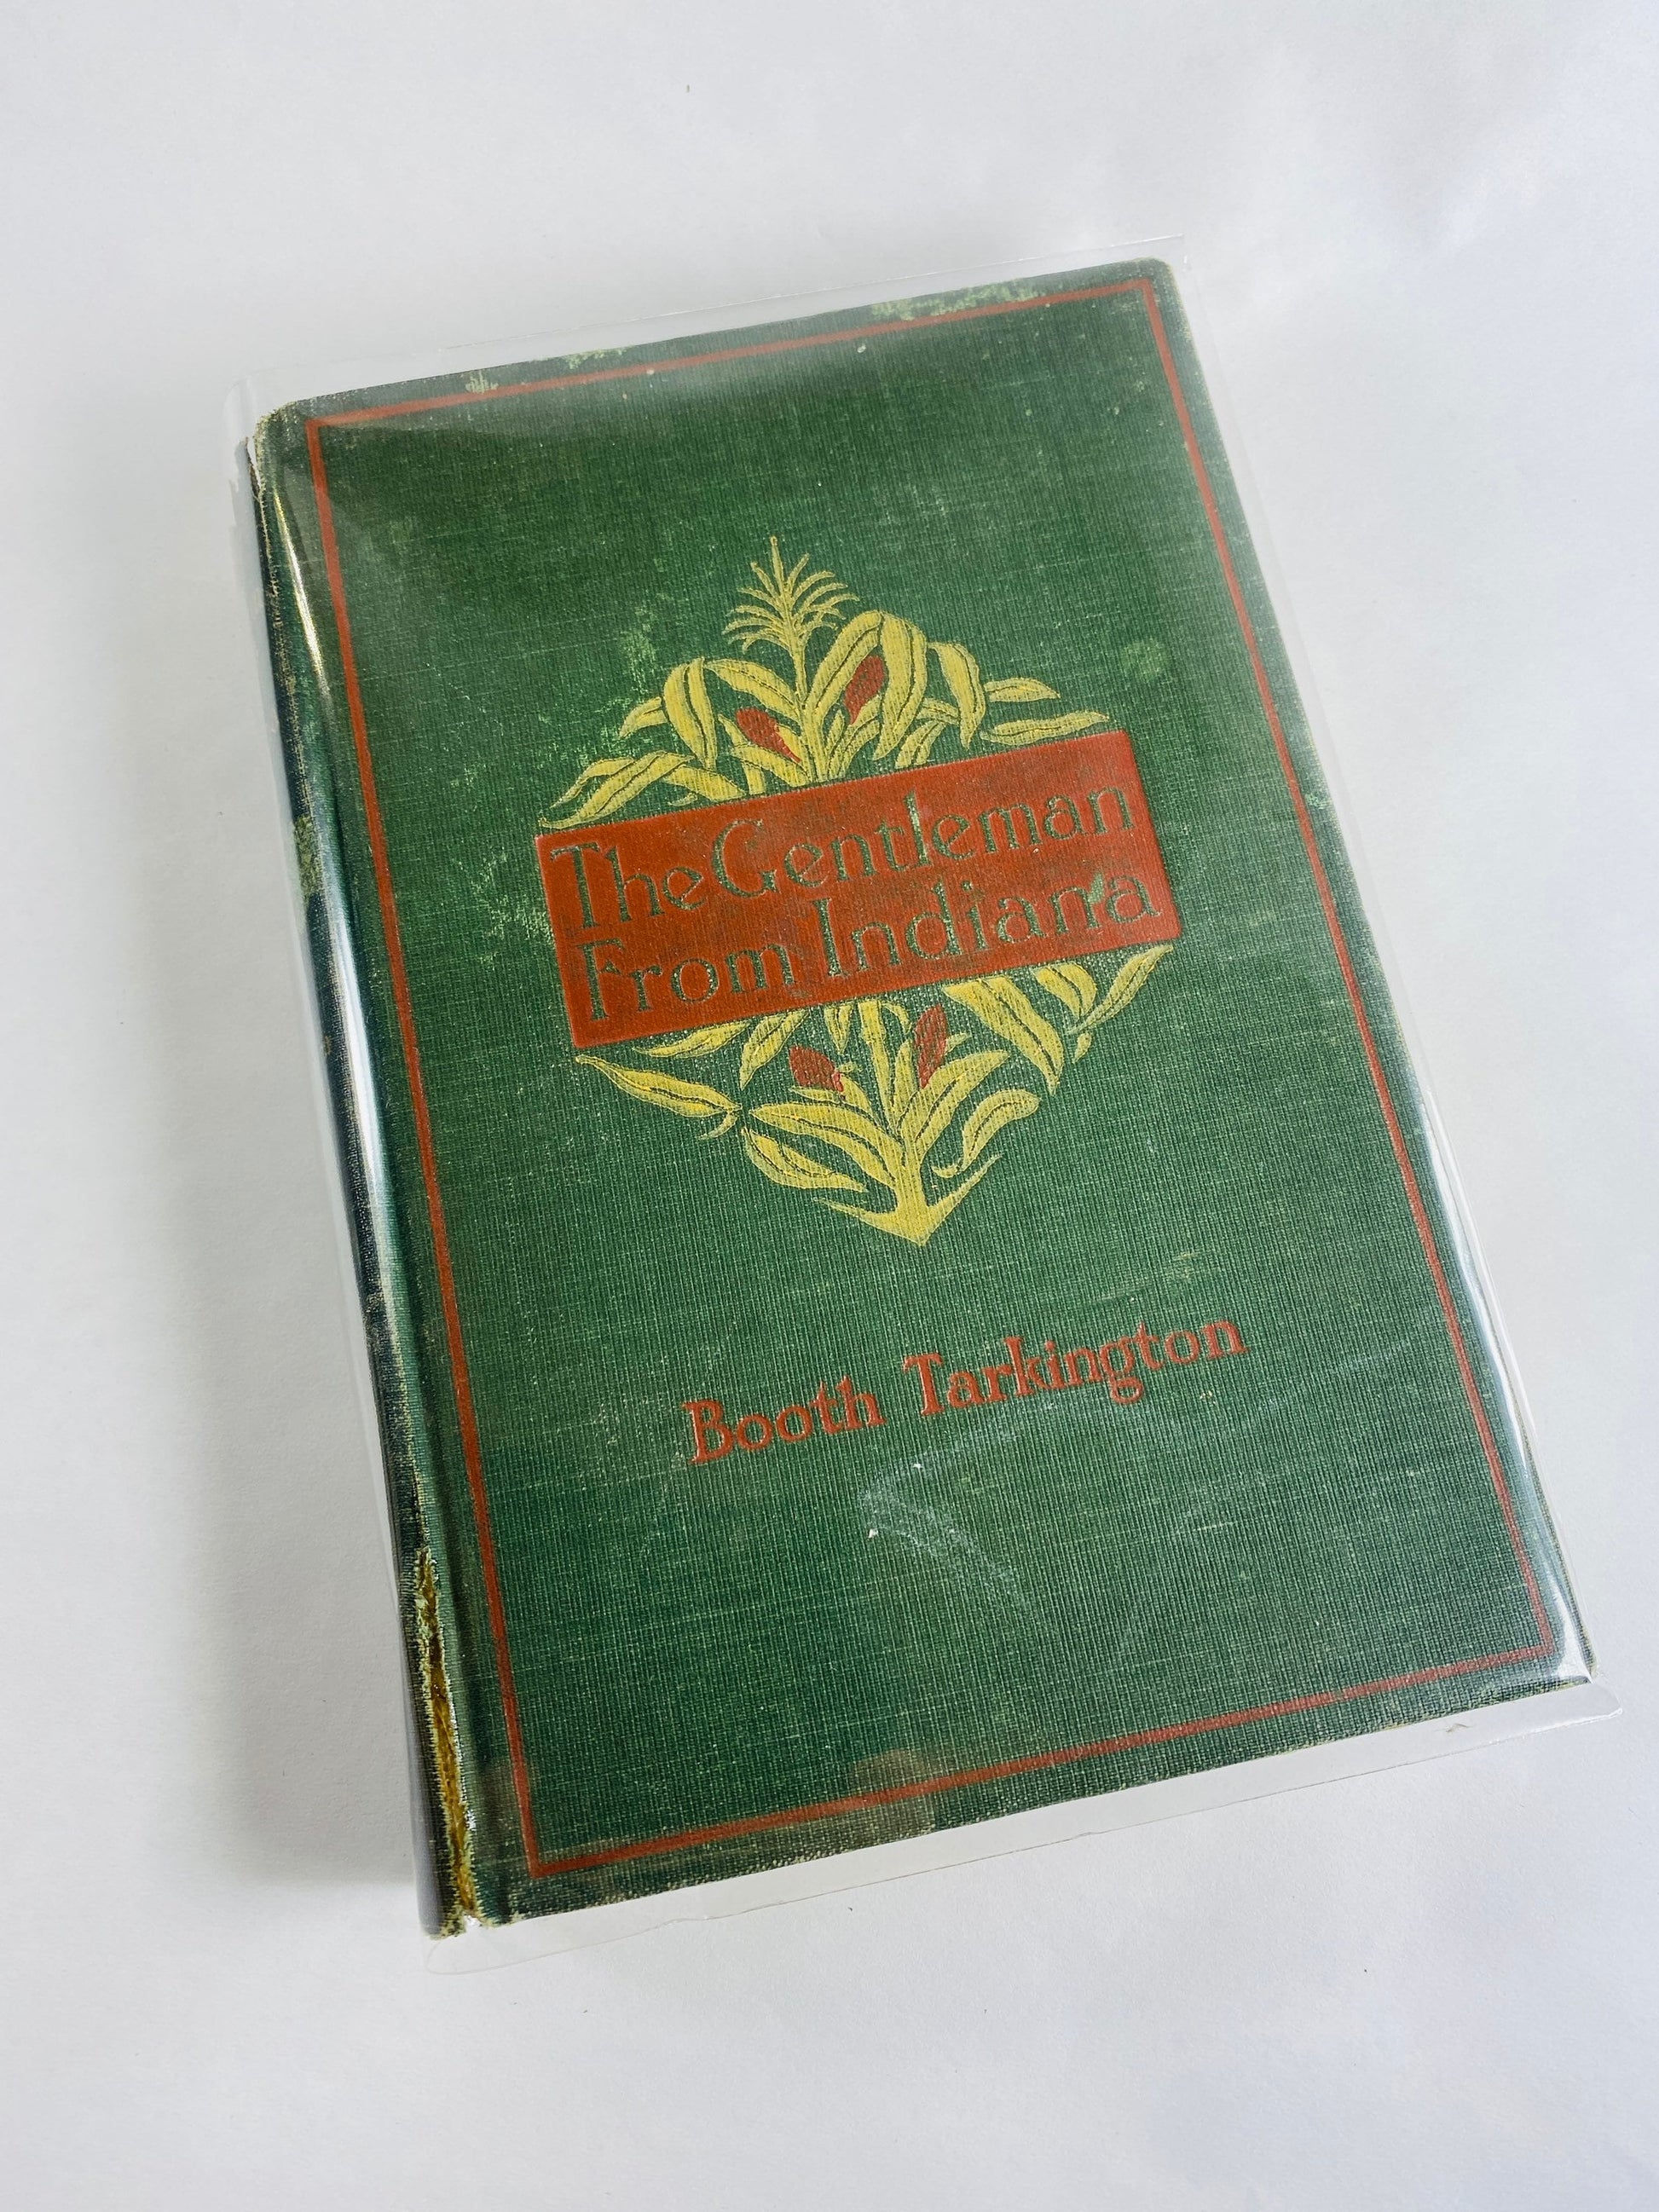 1899 Gentleman from Indiana by Booth Tarkington FIRST EDITION Vintage book about the Fight against political corruption. Green cloth boards